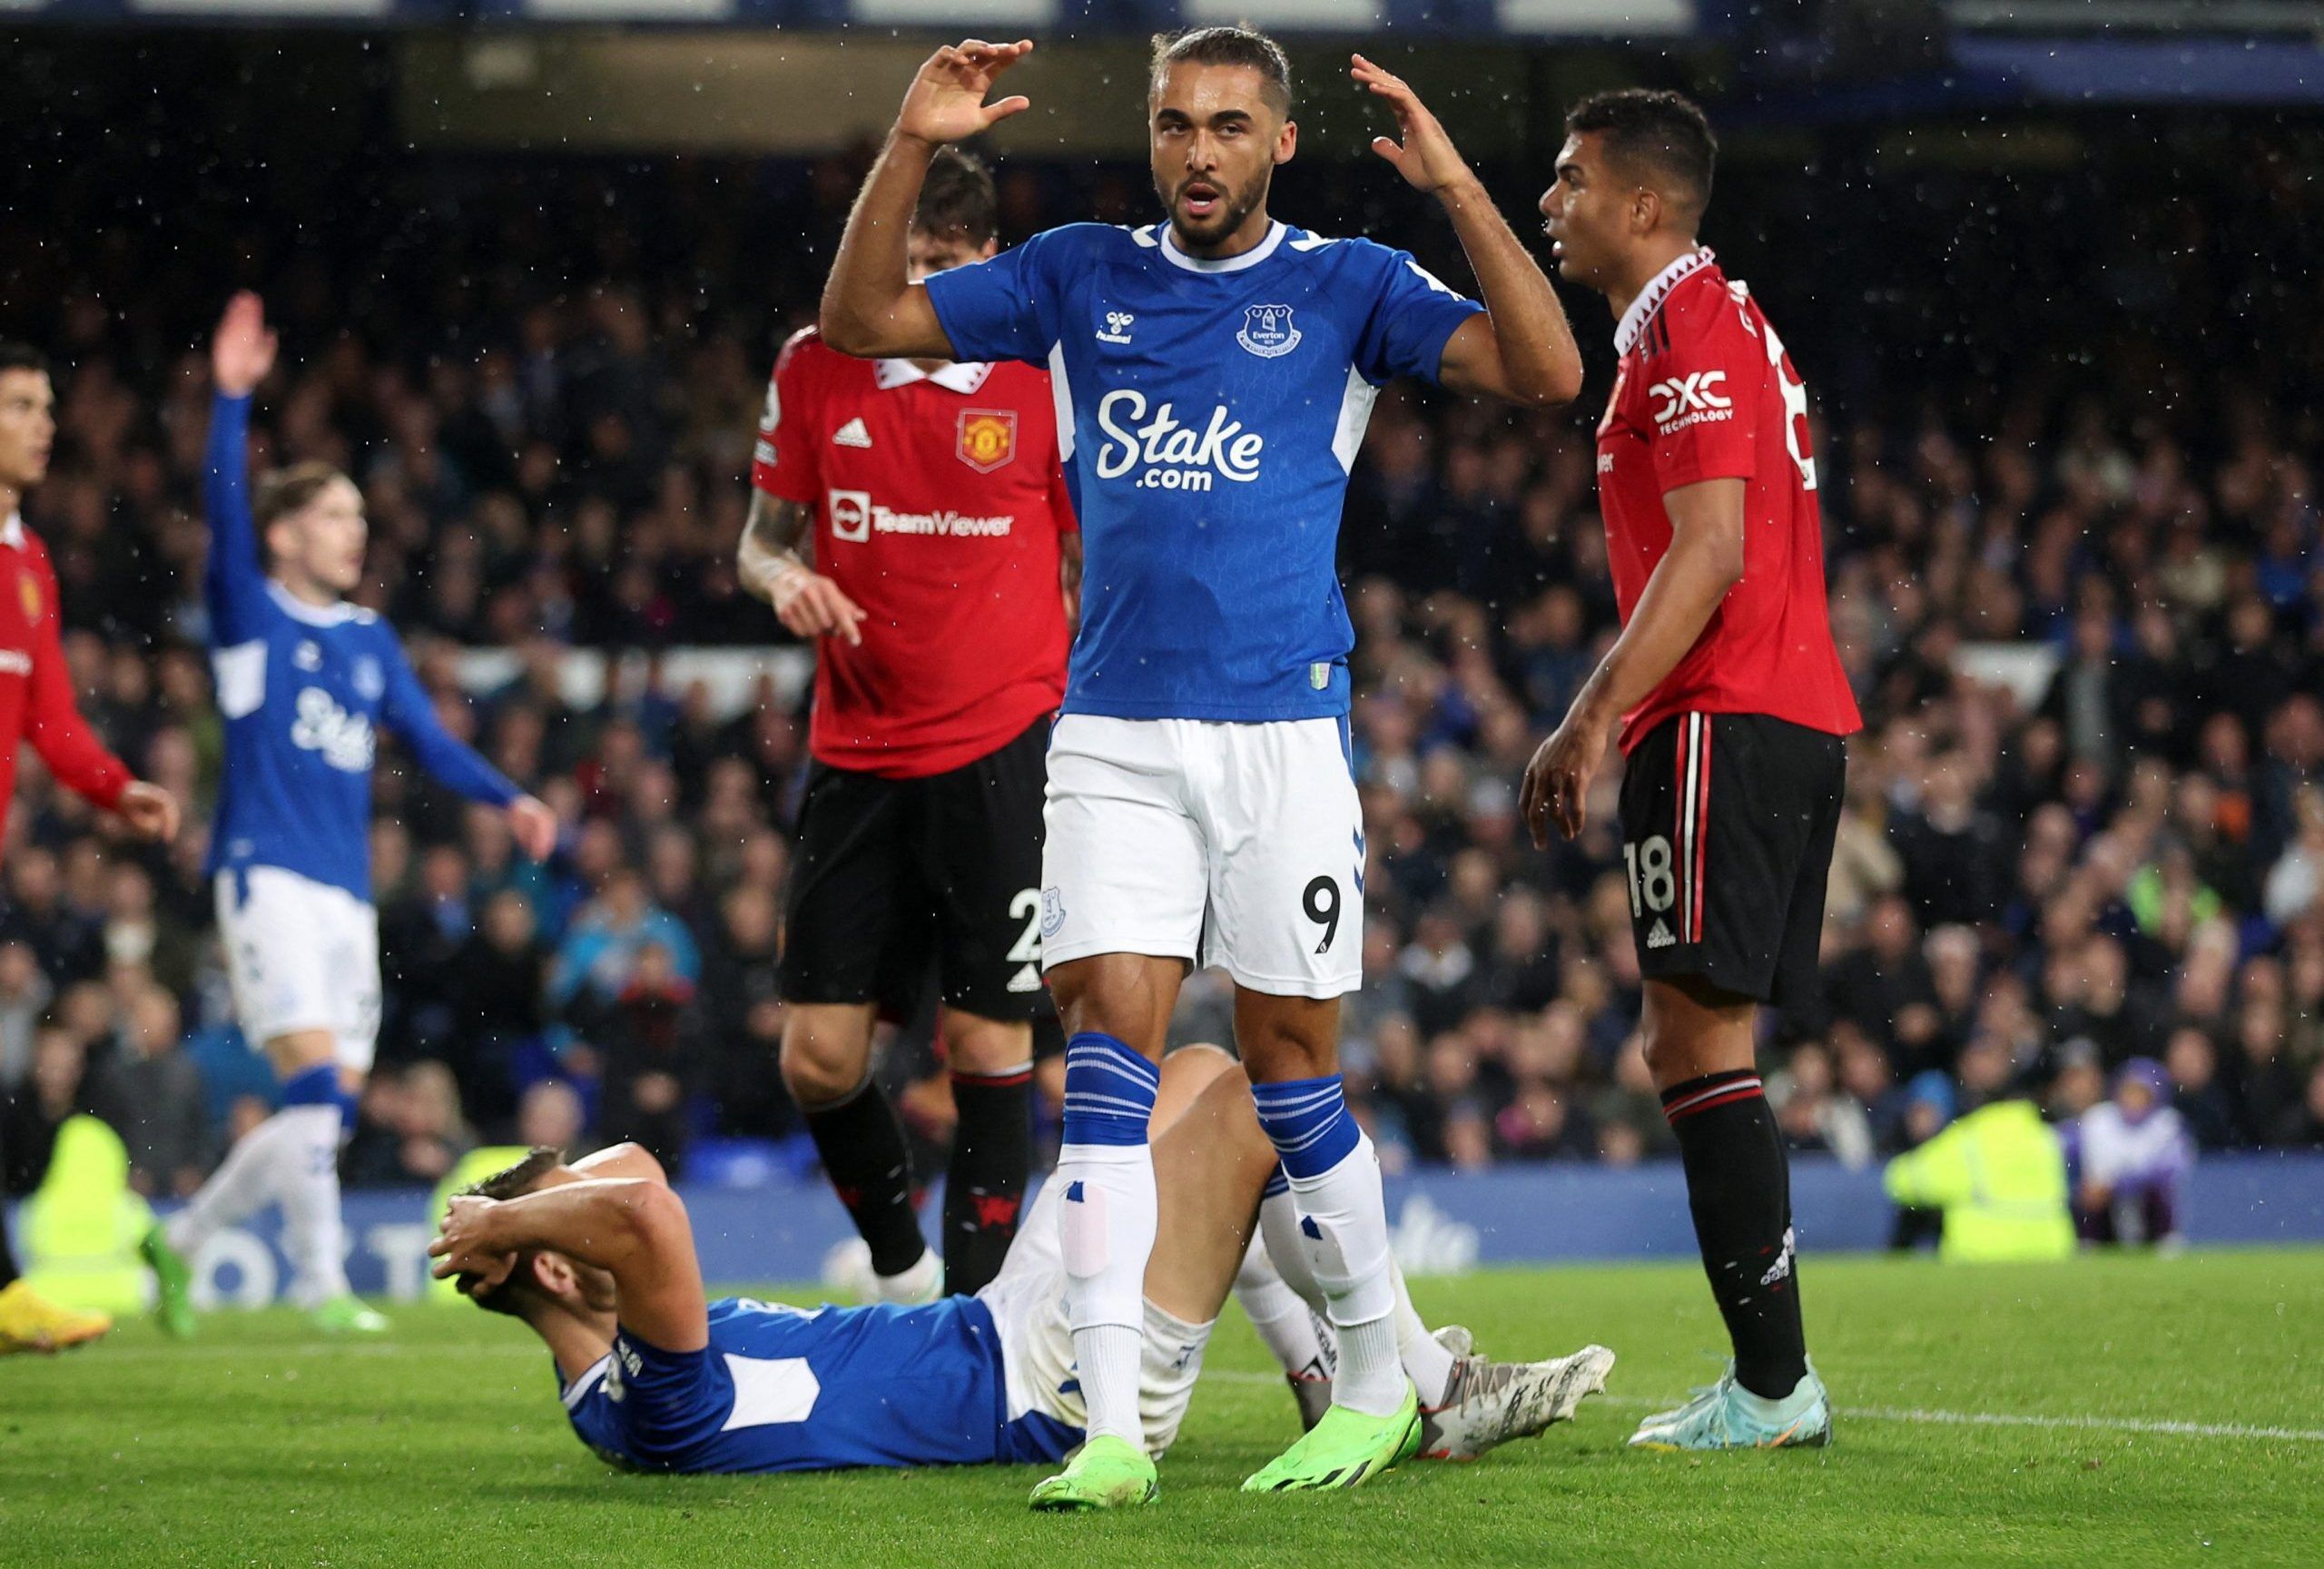 Soccer Football - Premier League - Everton v Manchester United - Goodison Park, Liverpool, Britain - October 9, 2022 Everton's Dominic Calvert-Lewin reacts Action Images via Reuters/Carl Recine EDITORIAL USE ONLY. No use with unauthorized audio, video, data, fixture lists, club/league logos or 'live' services. Online in-match use limited to 75 images, no video emulation. No use in betting, games or single club /league/player publications.  Please contact your account representative for further d